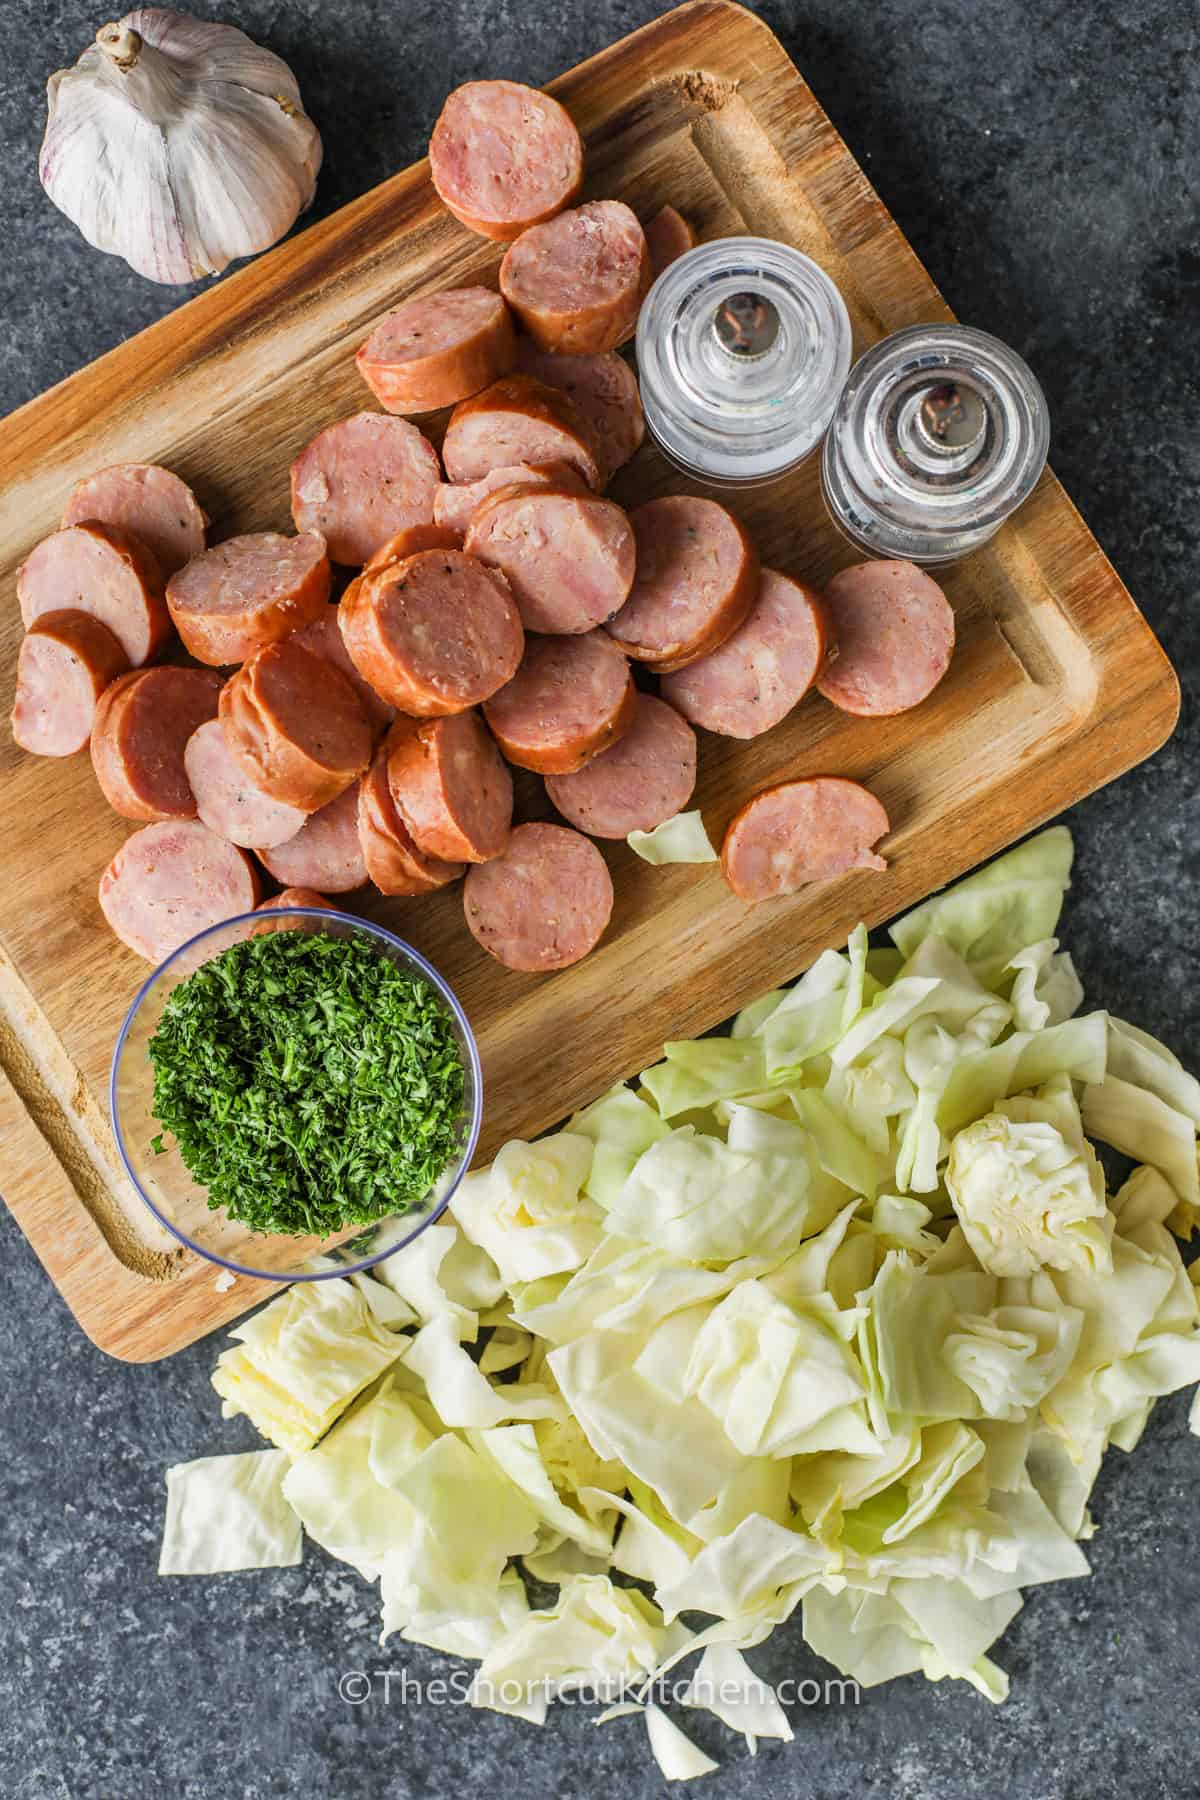 ingredients to make Fried Cabbage and Sausage